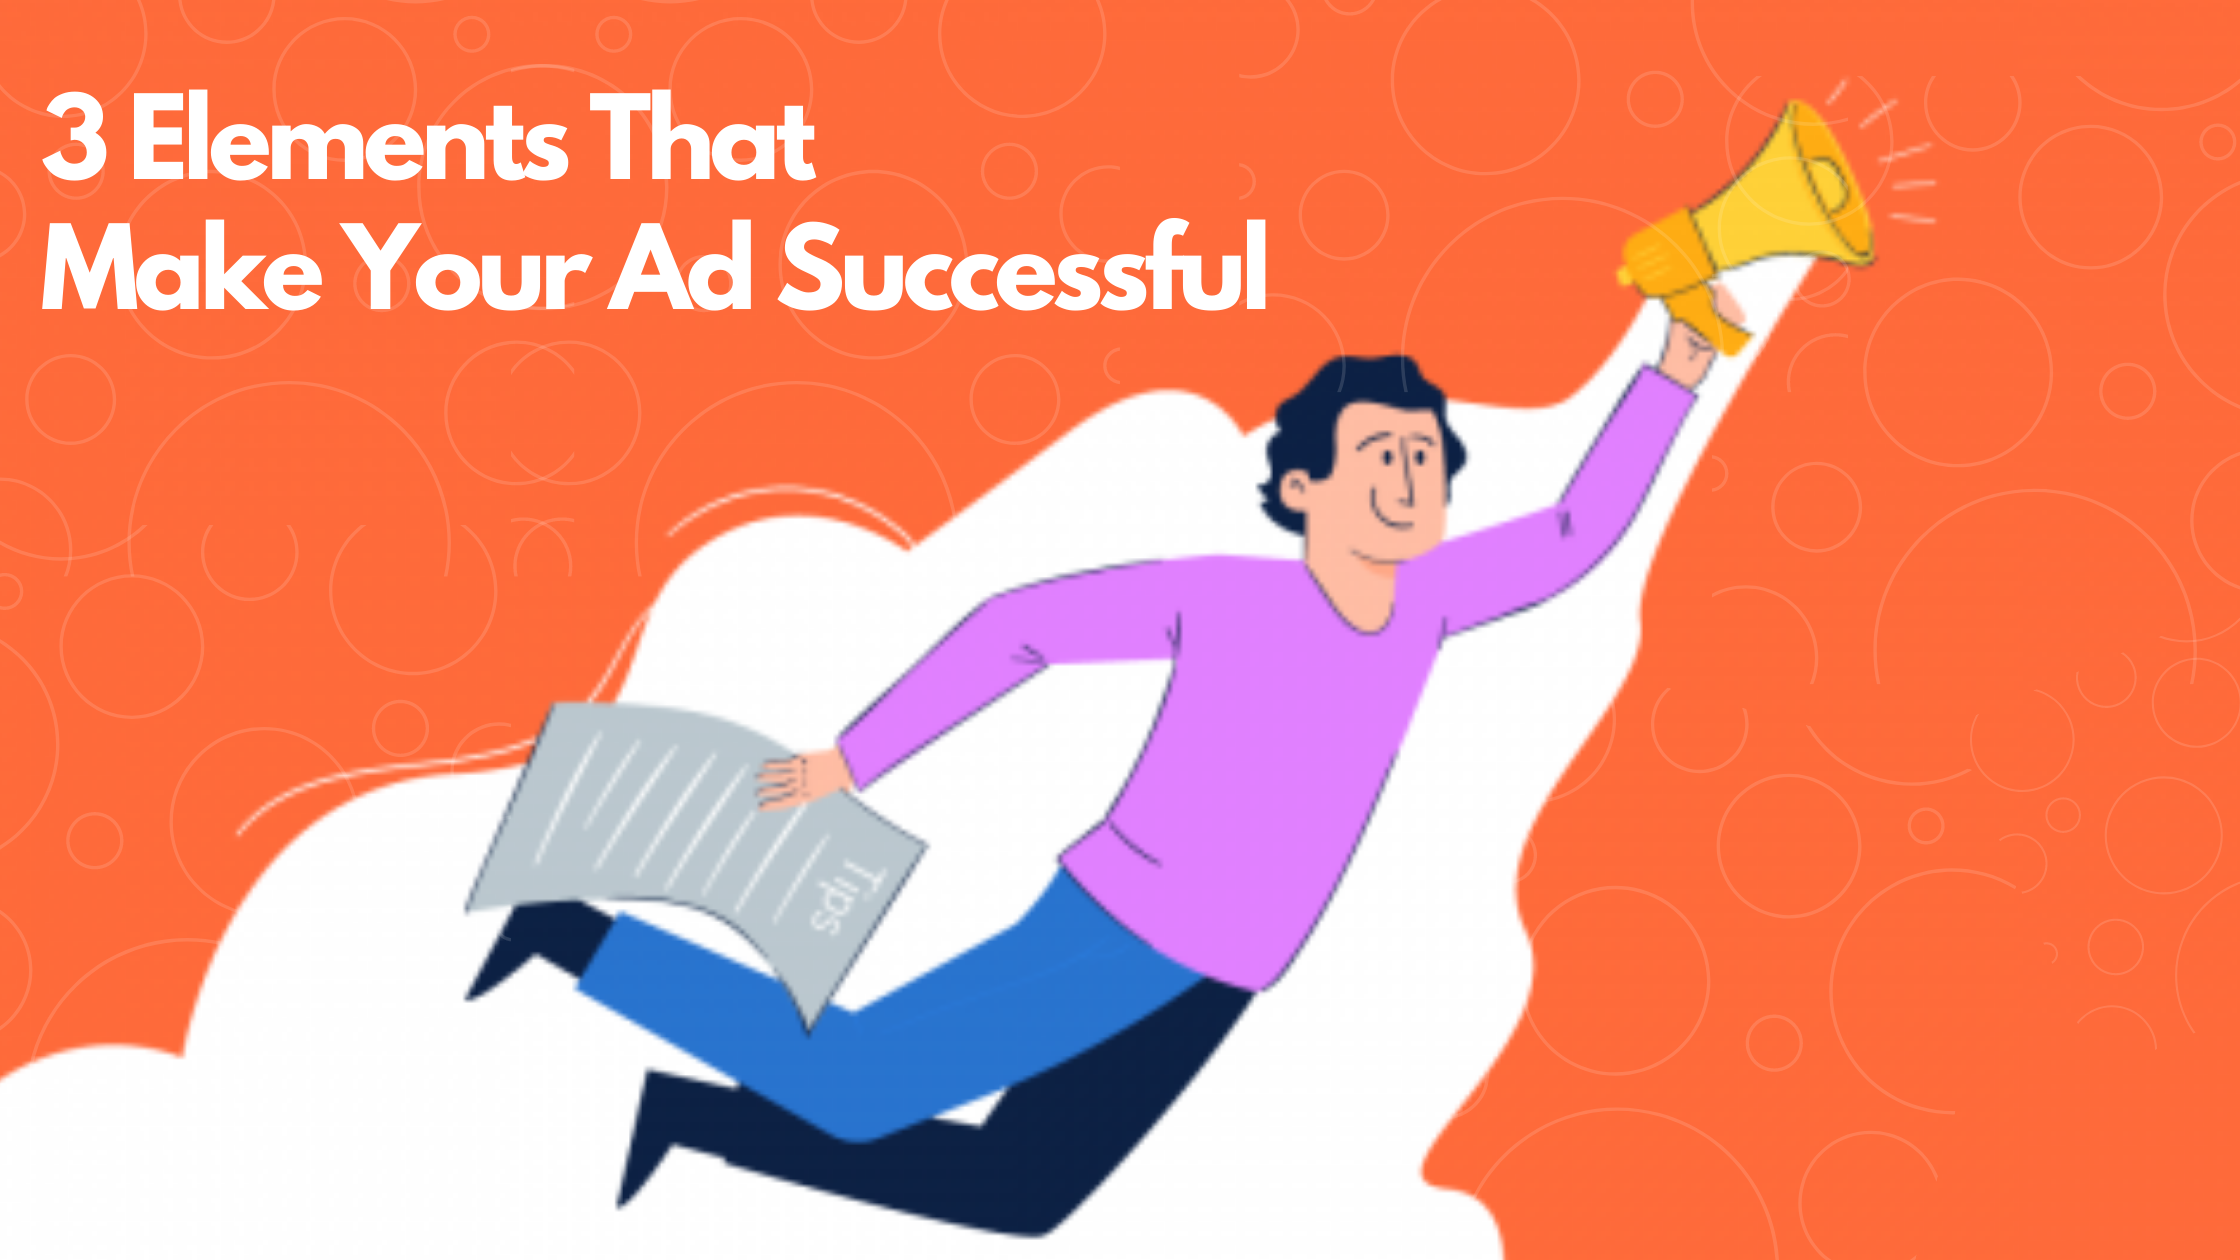 3 Elements That Make Your Ad Successful